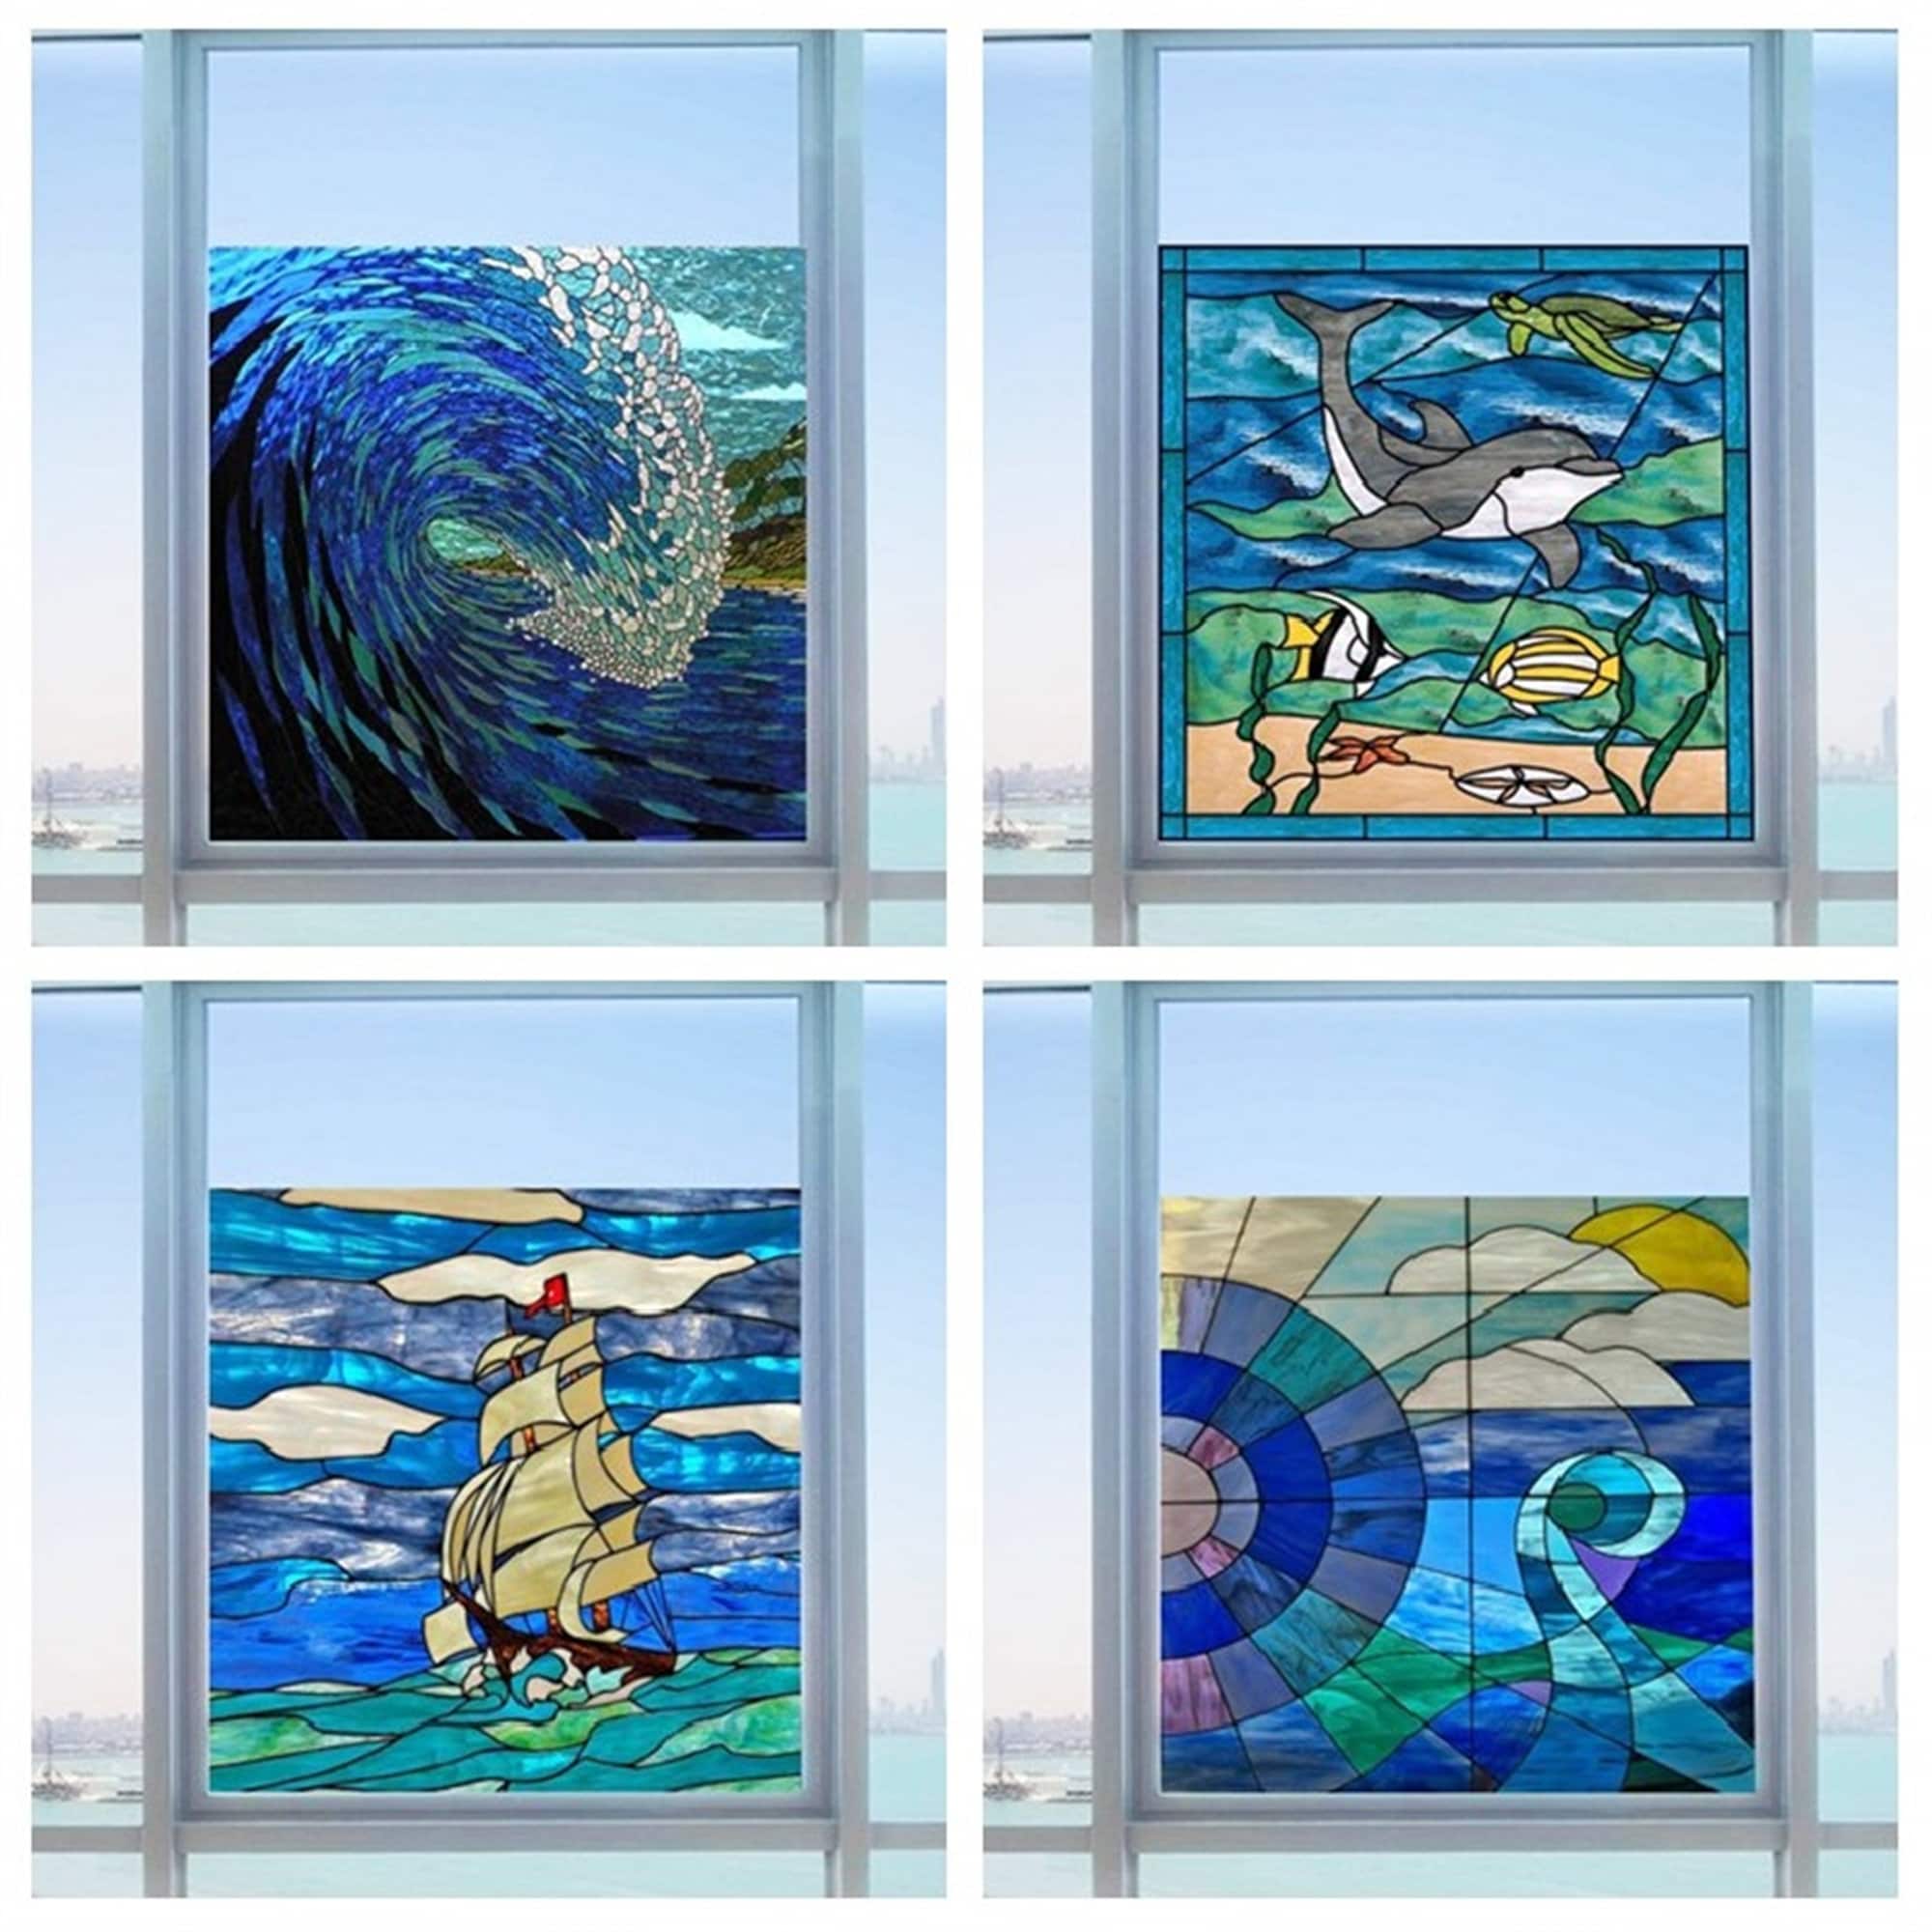 Customized glass stickers for bathroom windows, transparent and